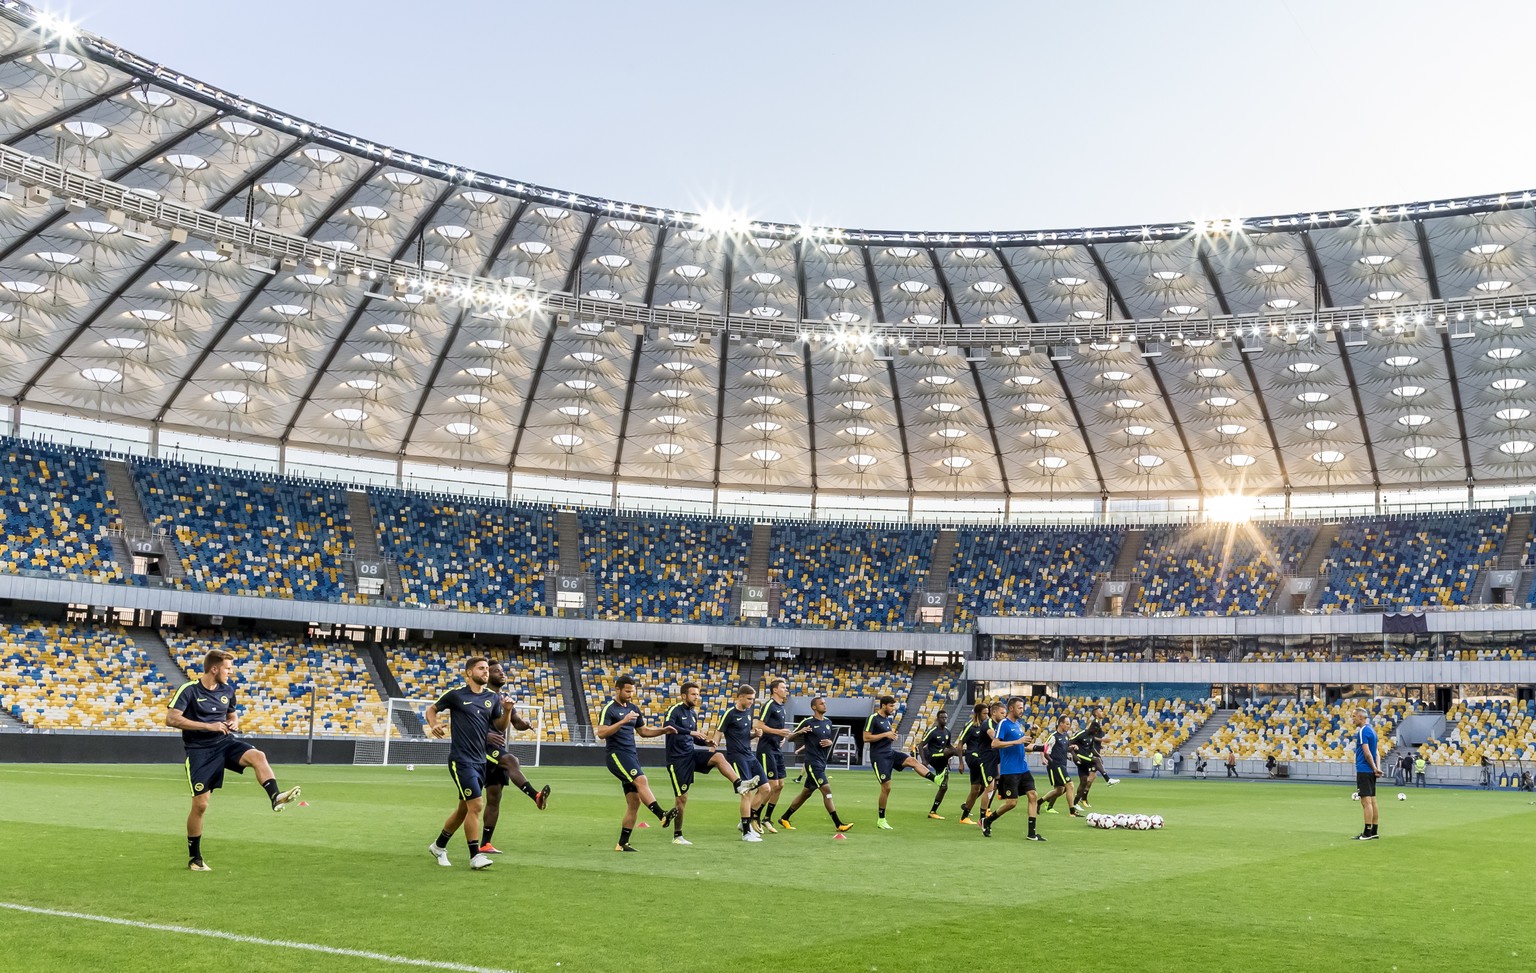 YB&#039;s players practice one day prior to the UEFA Champions League qualifier match between Ukraine&#039;s Dynamo Kyiv and Switzerland&#039;s BSC Young Boys, in the Olimpijskyj Stadium in Kiev, Ukra ...